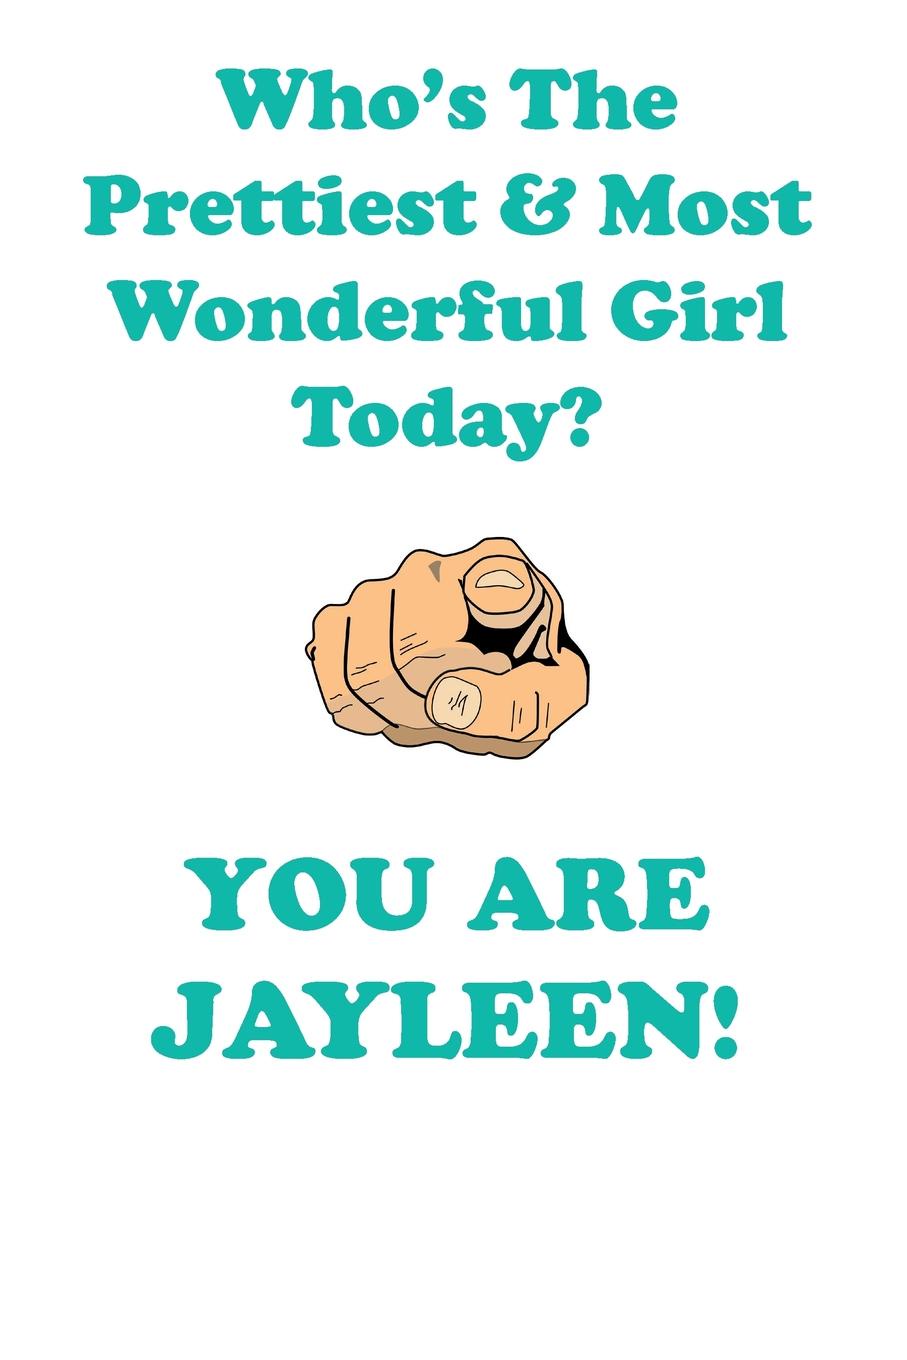 JAYLEEN is The Prettiest Affirmations Workbook Positive Affirmations Workbook Includes. Mentoring Questions, Guidance, Supporting You